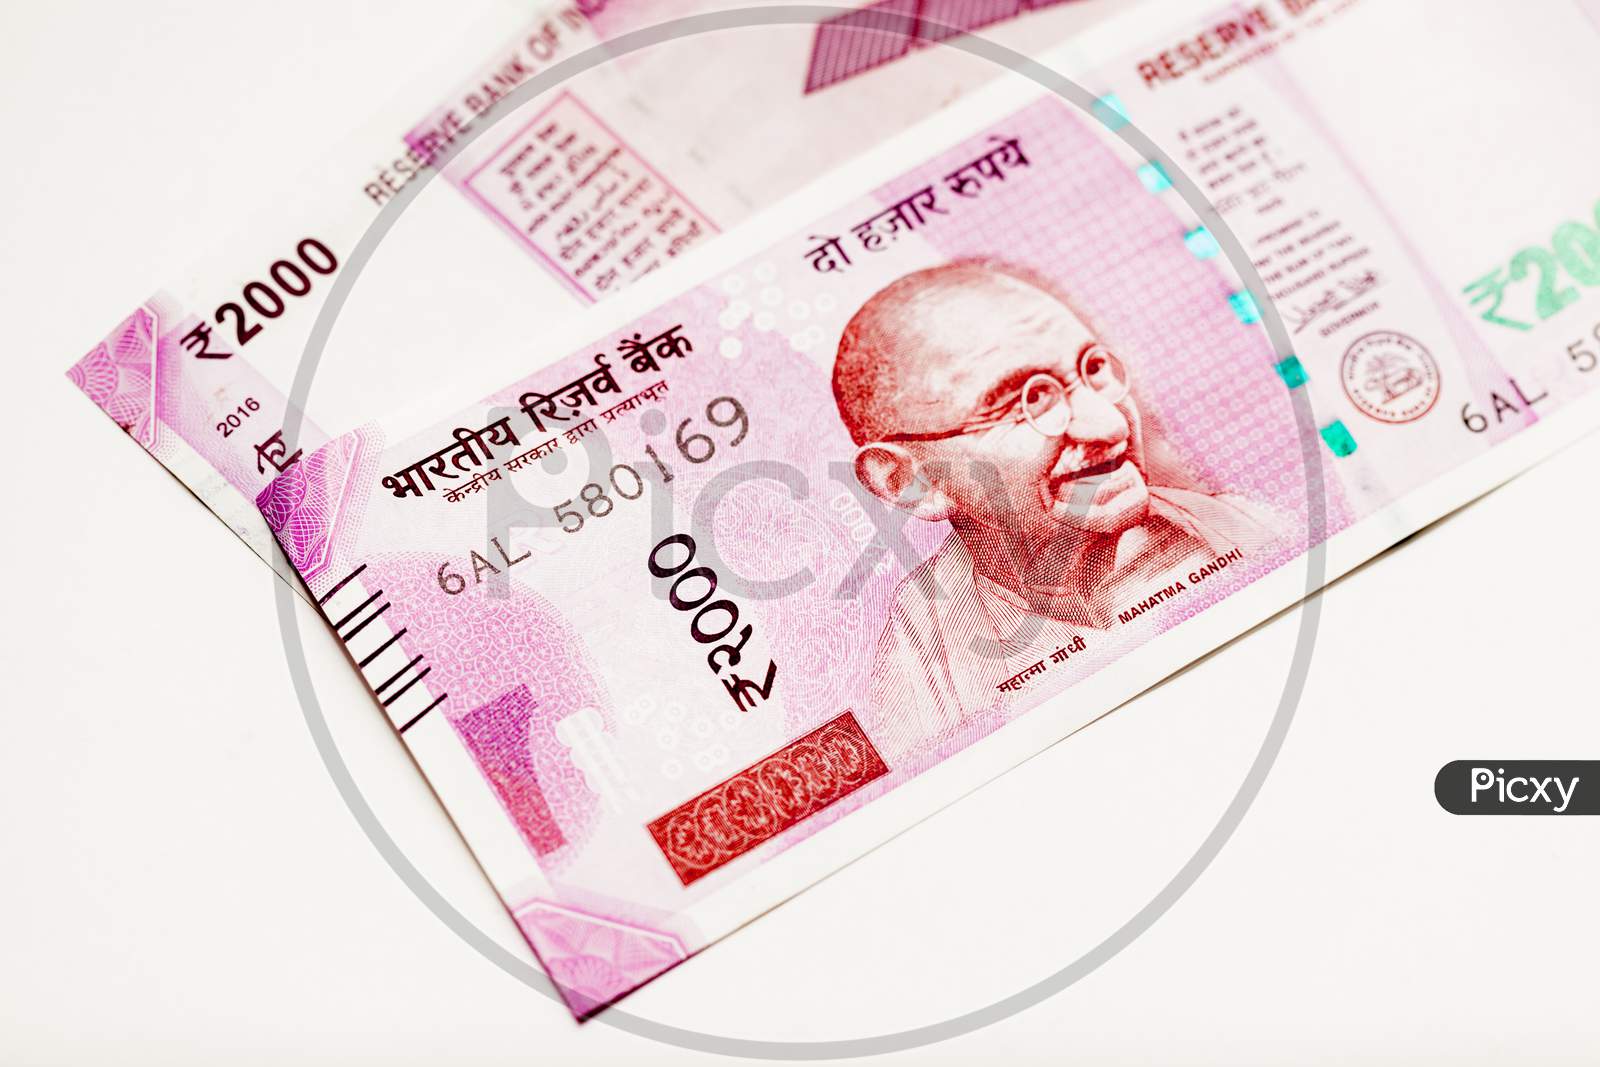 Indian Currency 2000 Rs Note